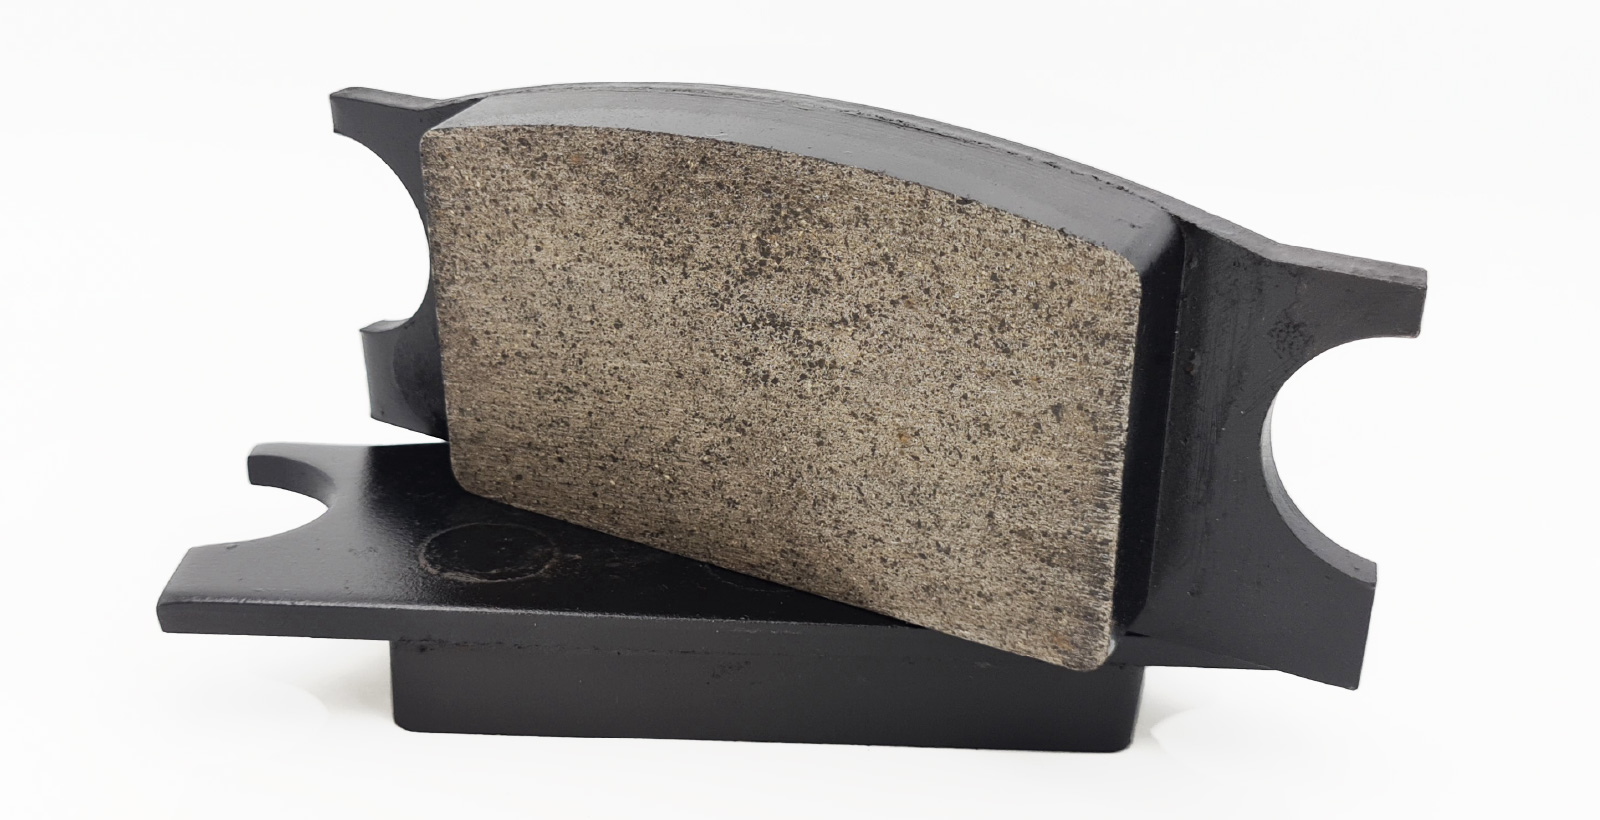 Off Highway Brake Pads for Paper and Pulp Industry